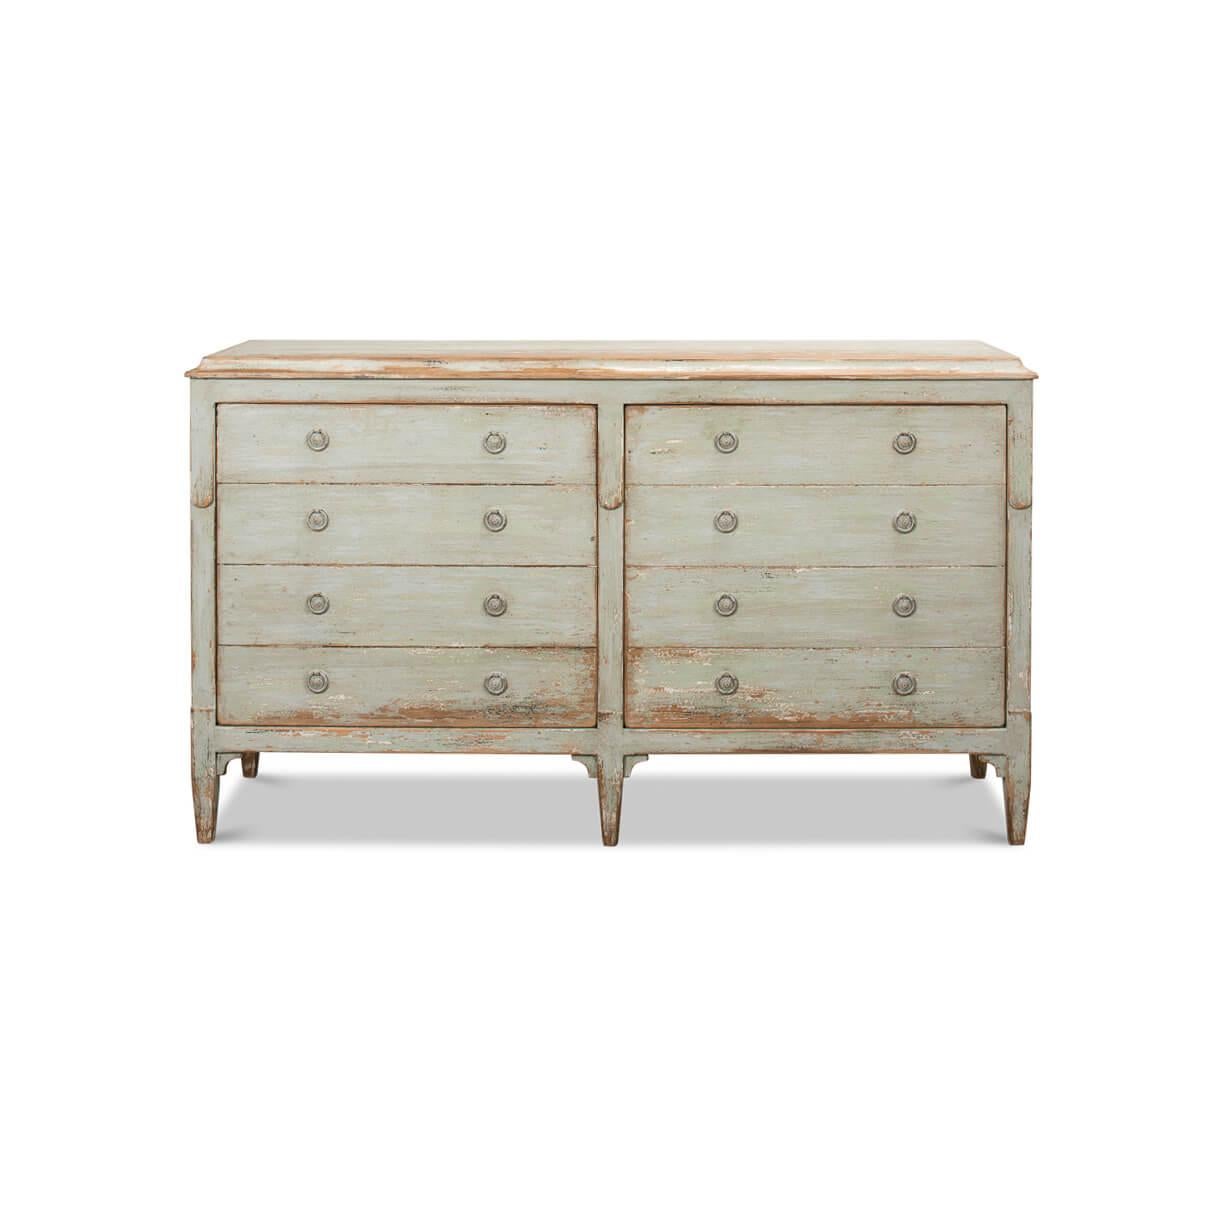 This beautifully aged piece embodies the charm of Europe in a bygone era, featuring a distressed sage painted finish that tells a story in every scratch and patina.
Offering ample storage behind two faux drawer front cupboard doors, it's as